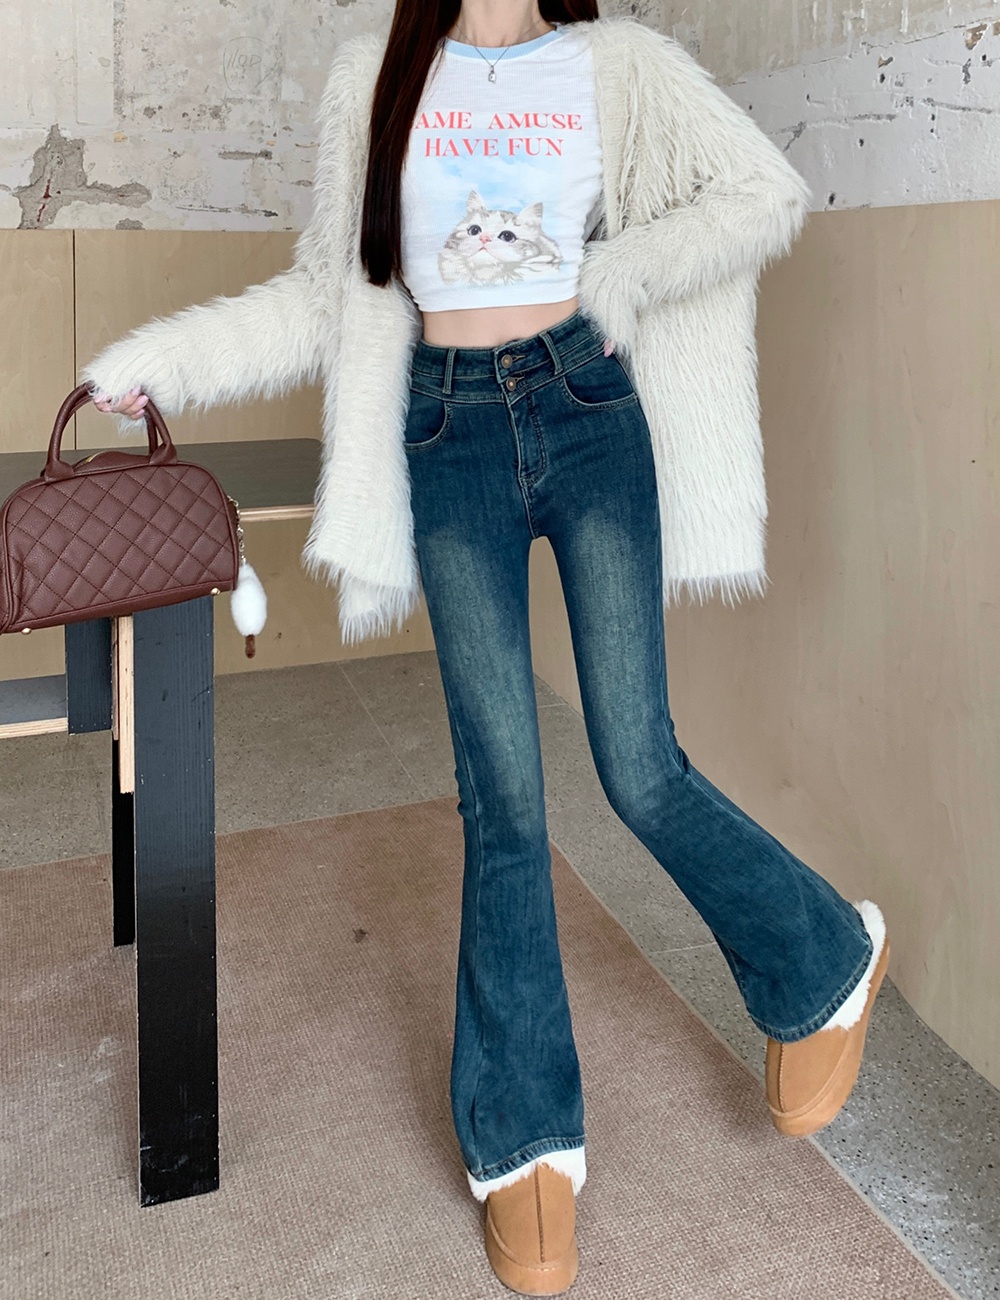 Winter thermal jeans Korean style long pants for women